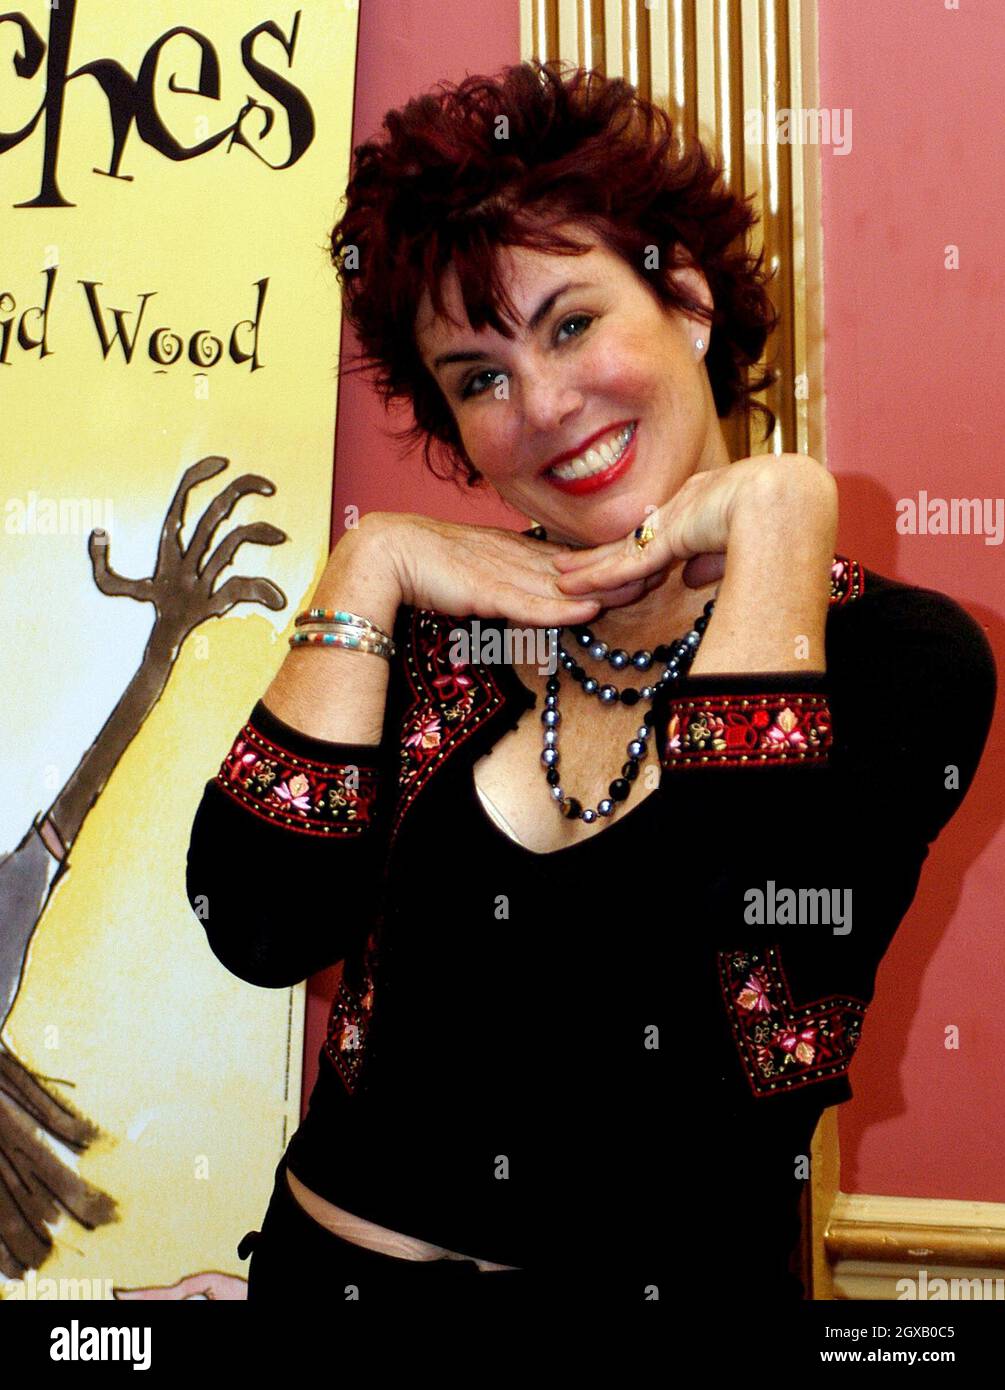 Ruby Wax stars as The Grand High Witch in the stage adaptation of Roal Dahl's classic children's book 'The Witches'.  The show has a five week season at the Wyndhams Theatre in London. Stock Photo